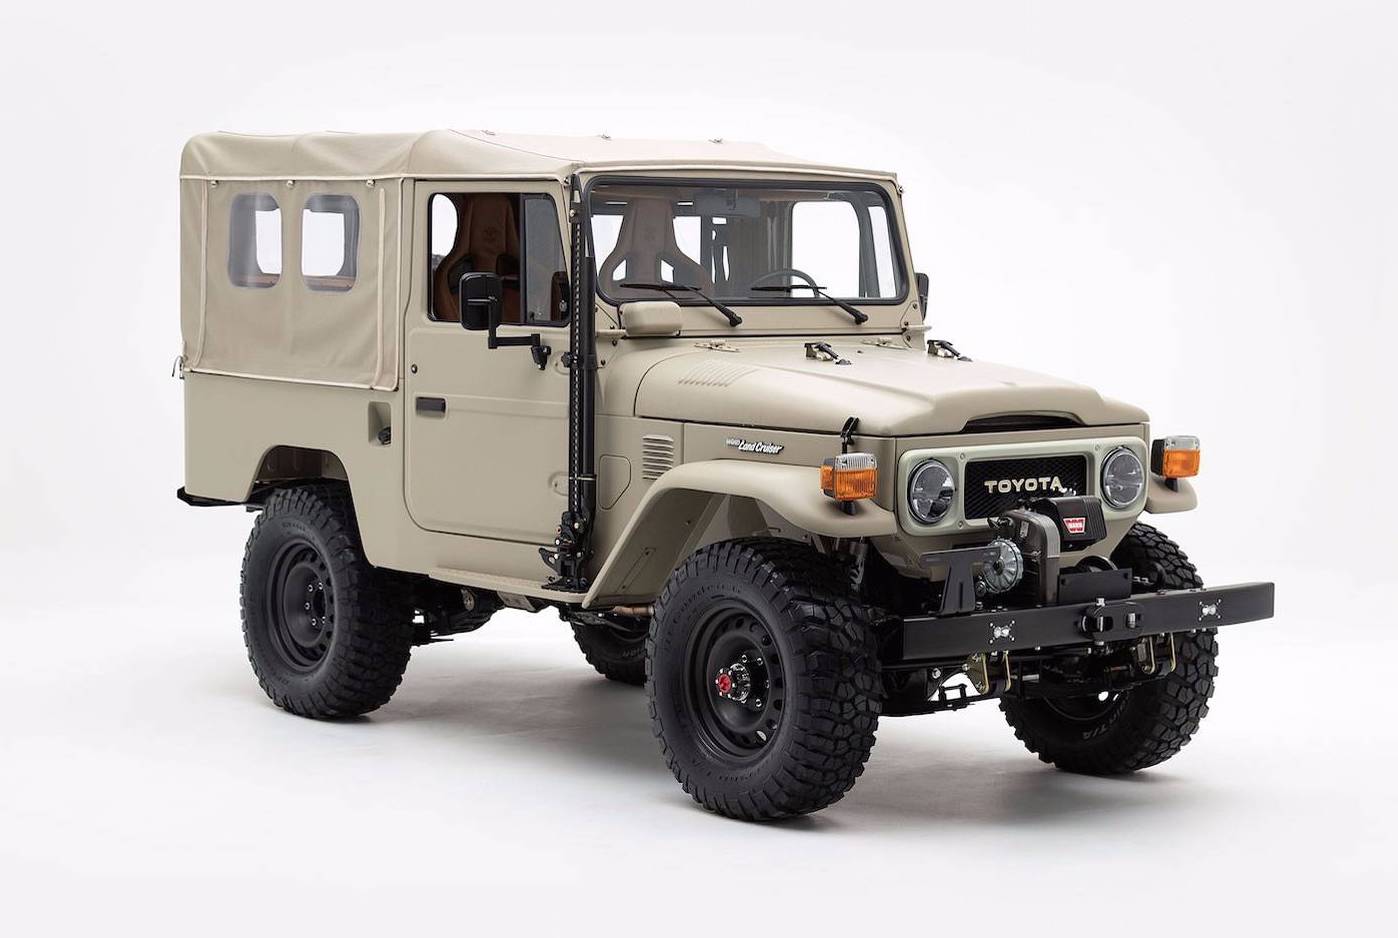 The Fj Company Recreates Classic With Modern V6 24 Being Made